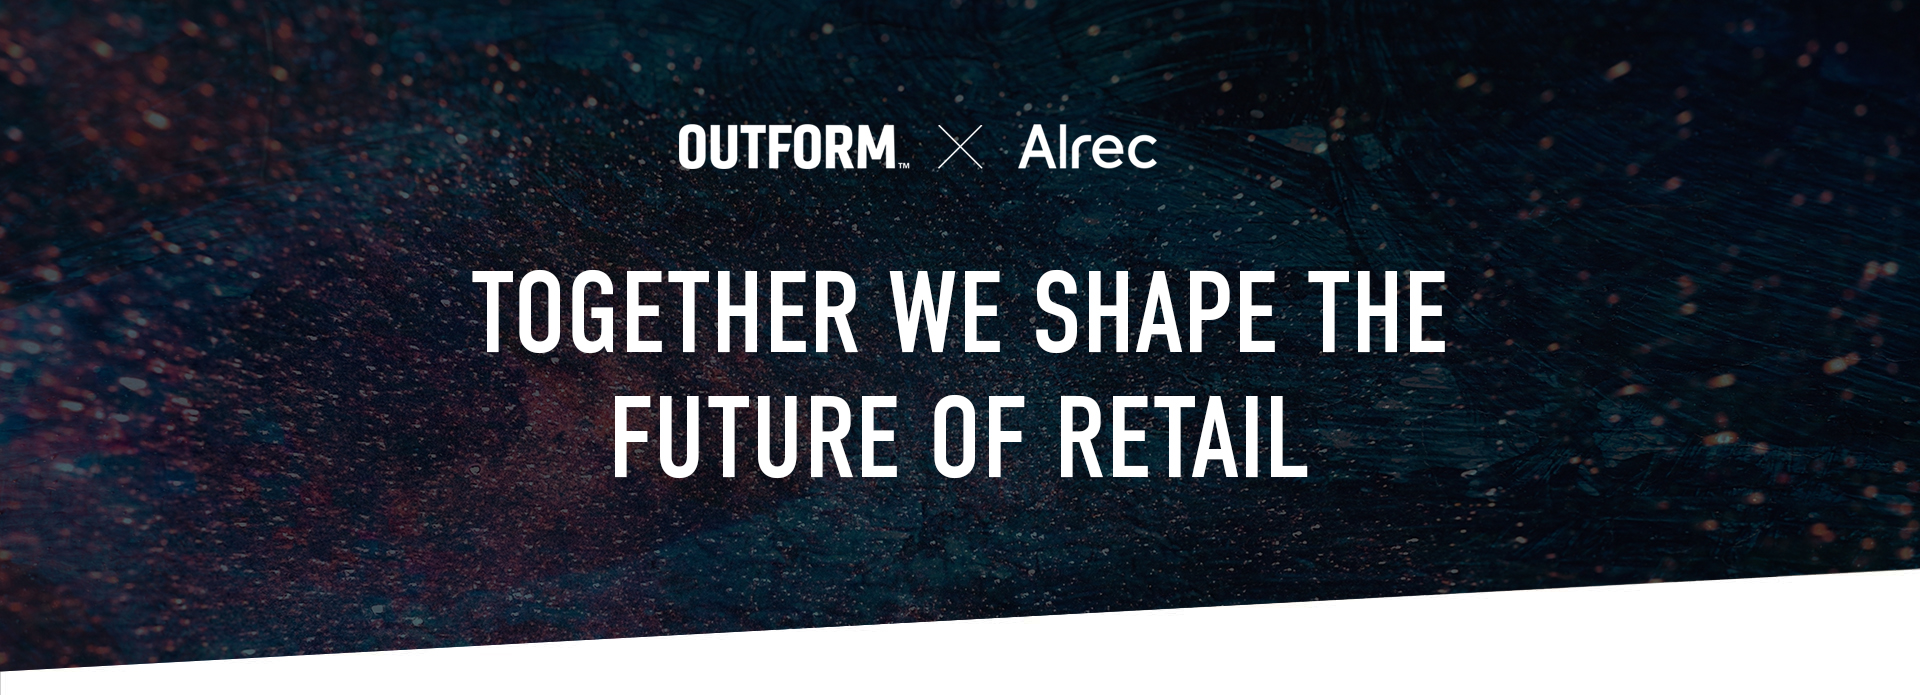 Outform and Alrec join Forces